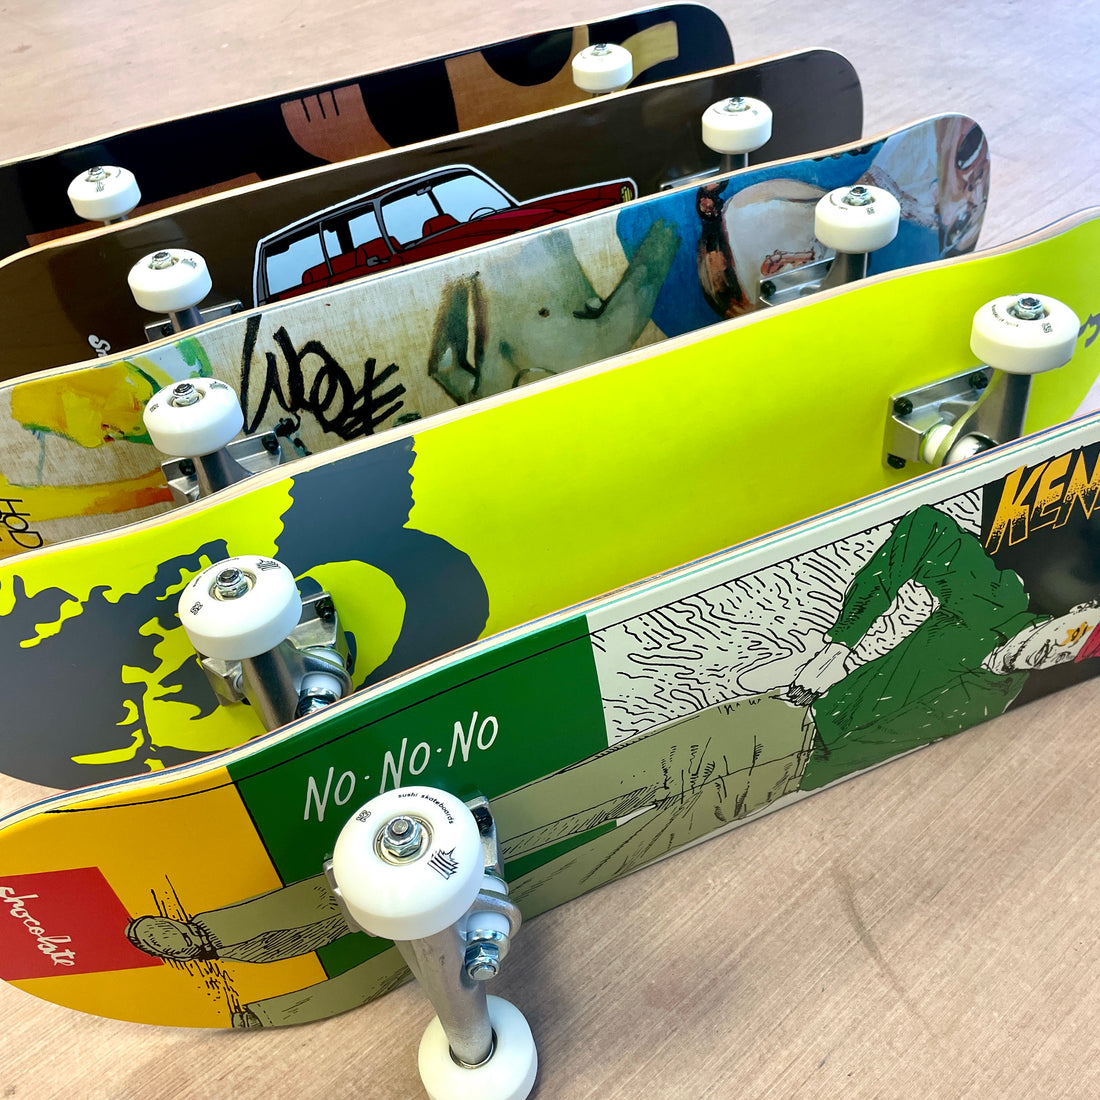 Is This Skateboard Right For My Child? Skateboards For Kids (Ages 5-13)